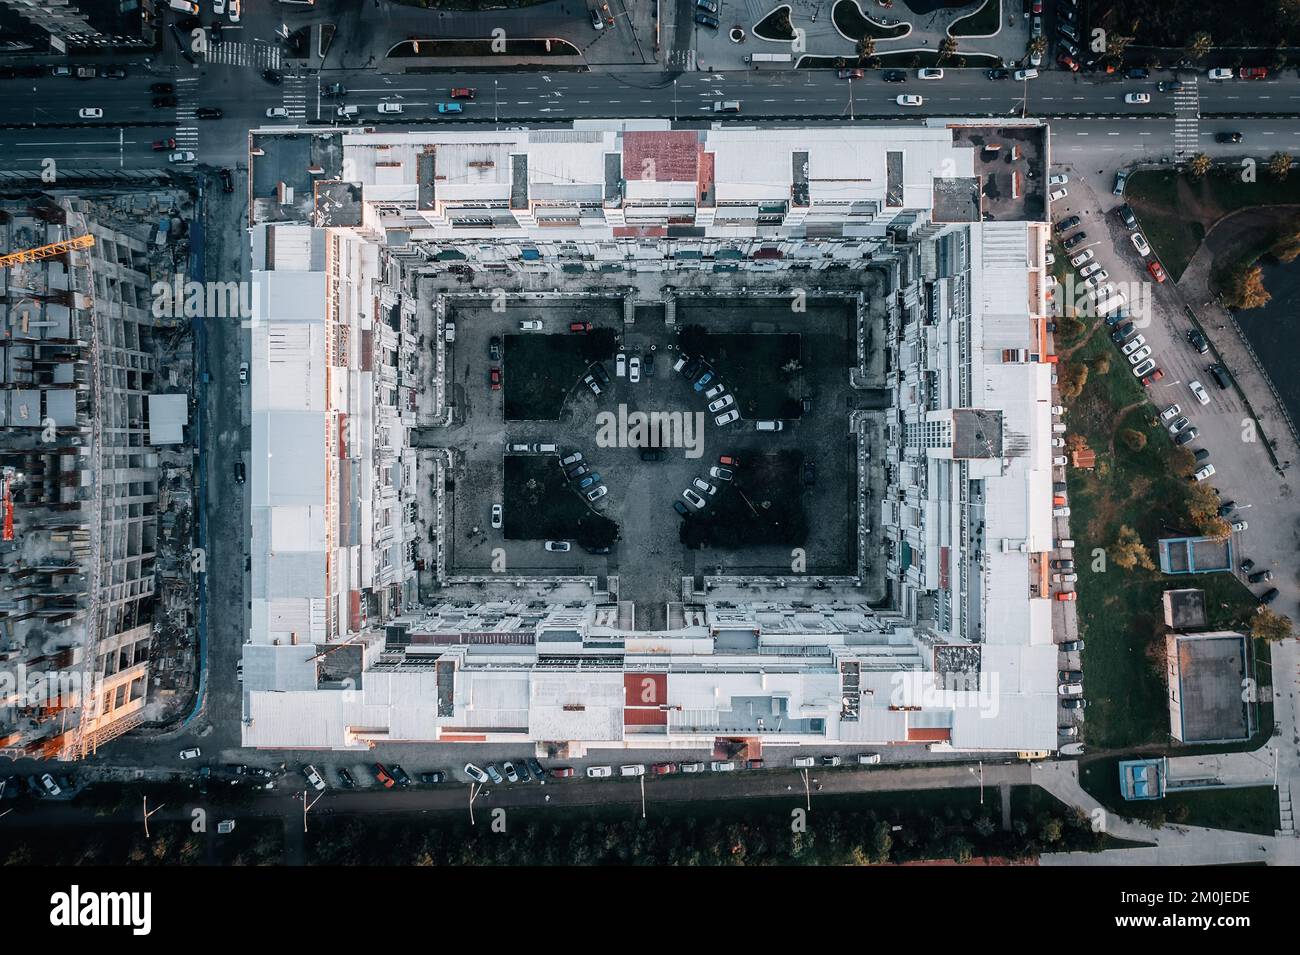 Modern house or building in square shape with palace well inside, aerial top view from drone. Stock Photo